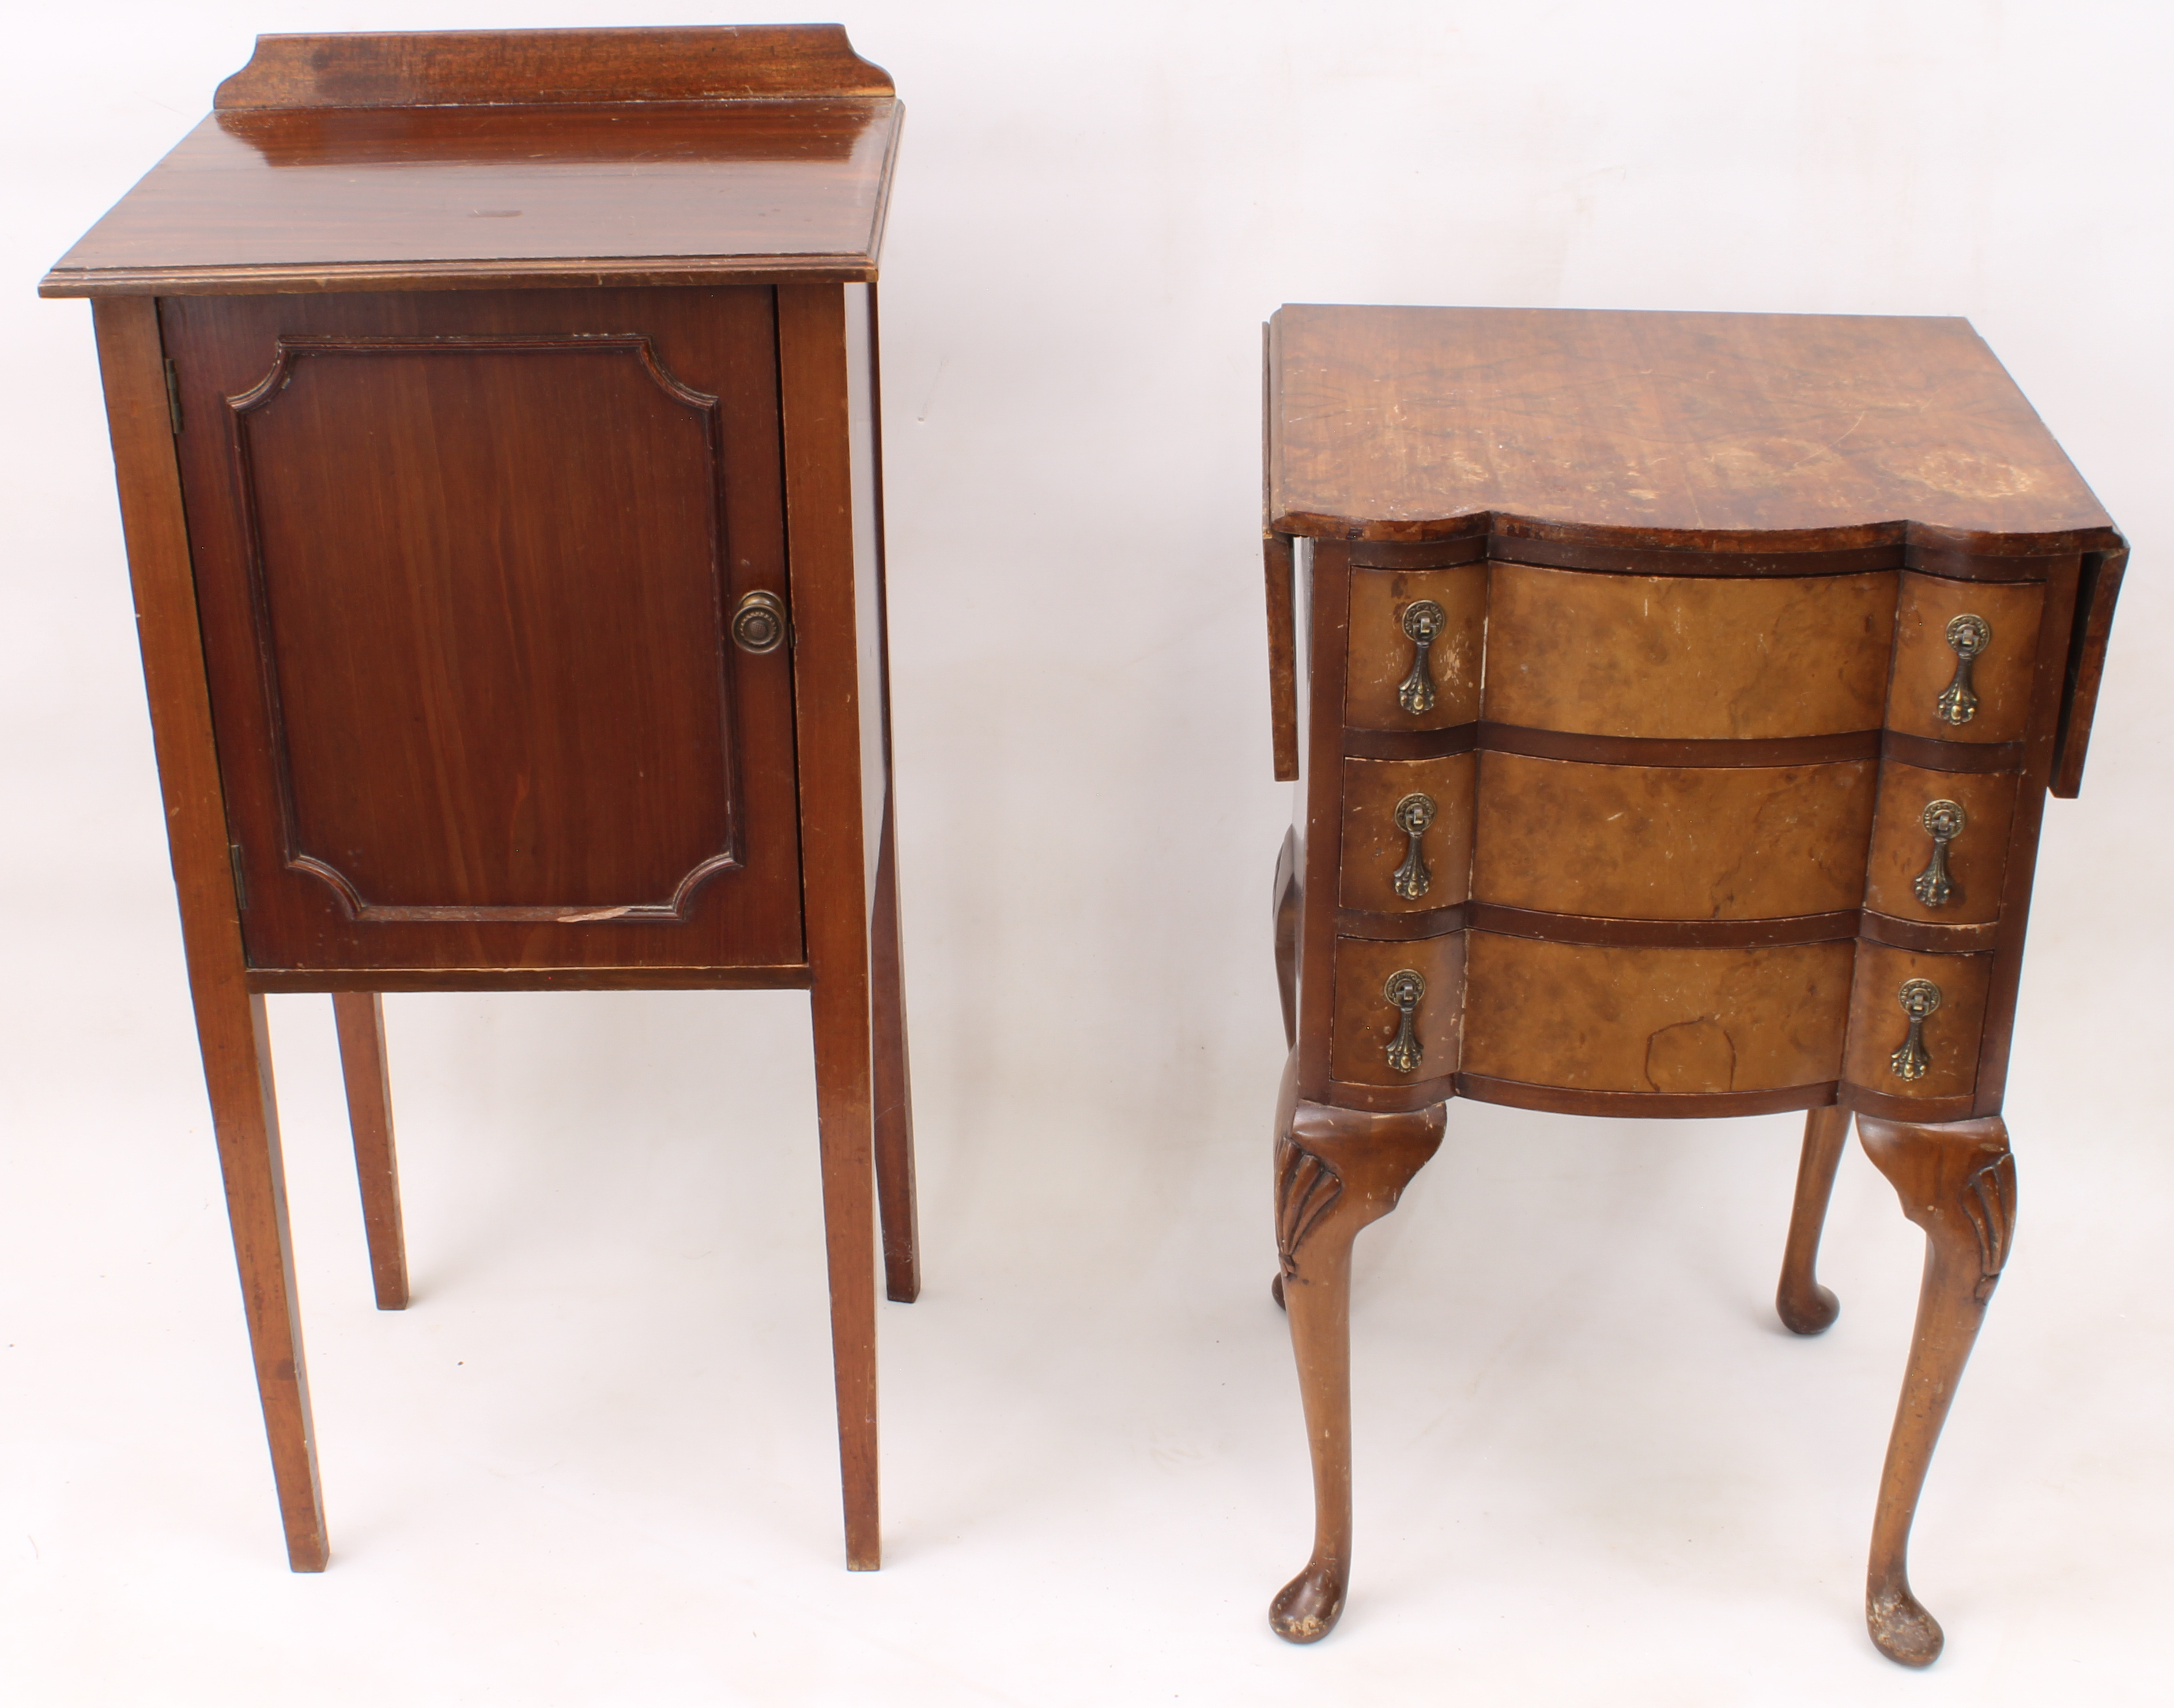 A bedside cabinet and a bedside chest: 1. Edwardian mahogany cabinet, moulded top with short upstand